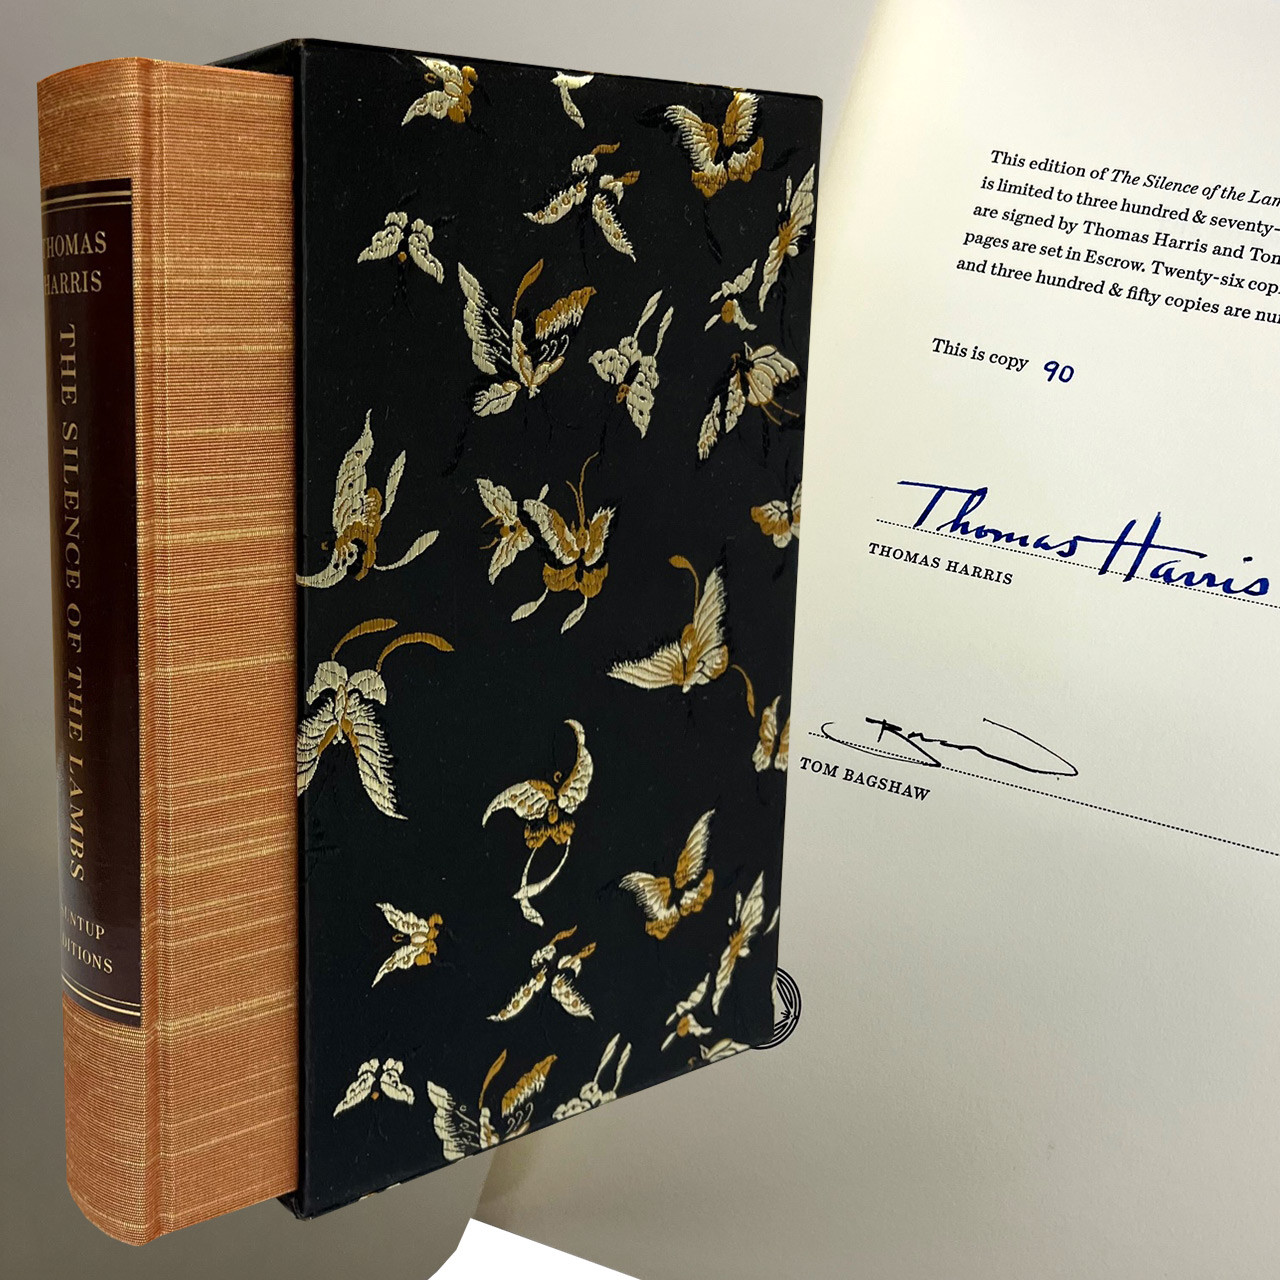 Thomas Harris "Silence of the Lambs" Slipcased Signed Limited Edition No. 90 of 350  [Very Fine]